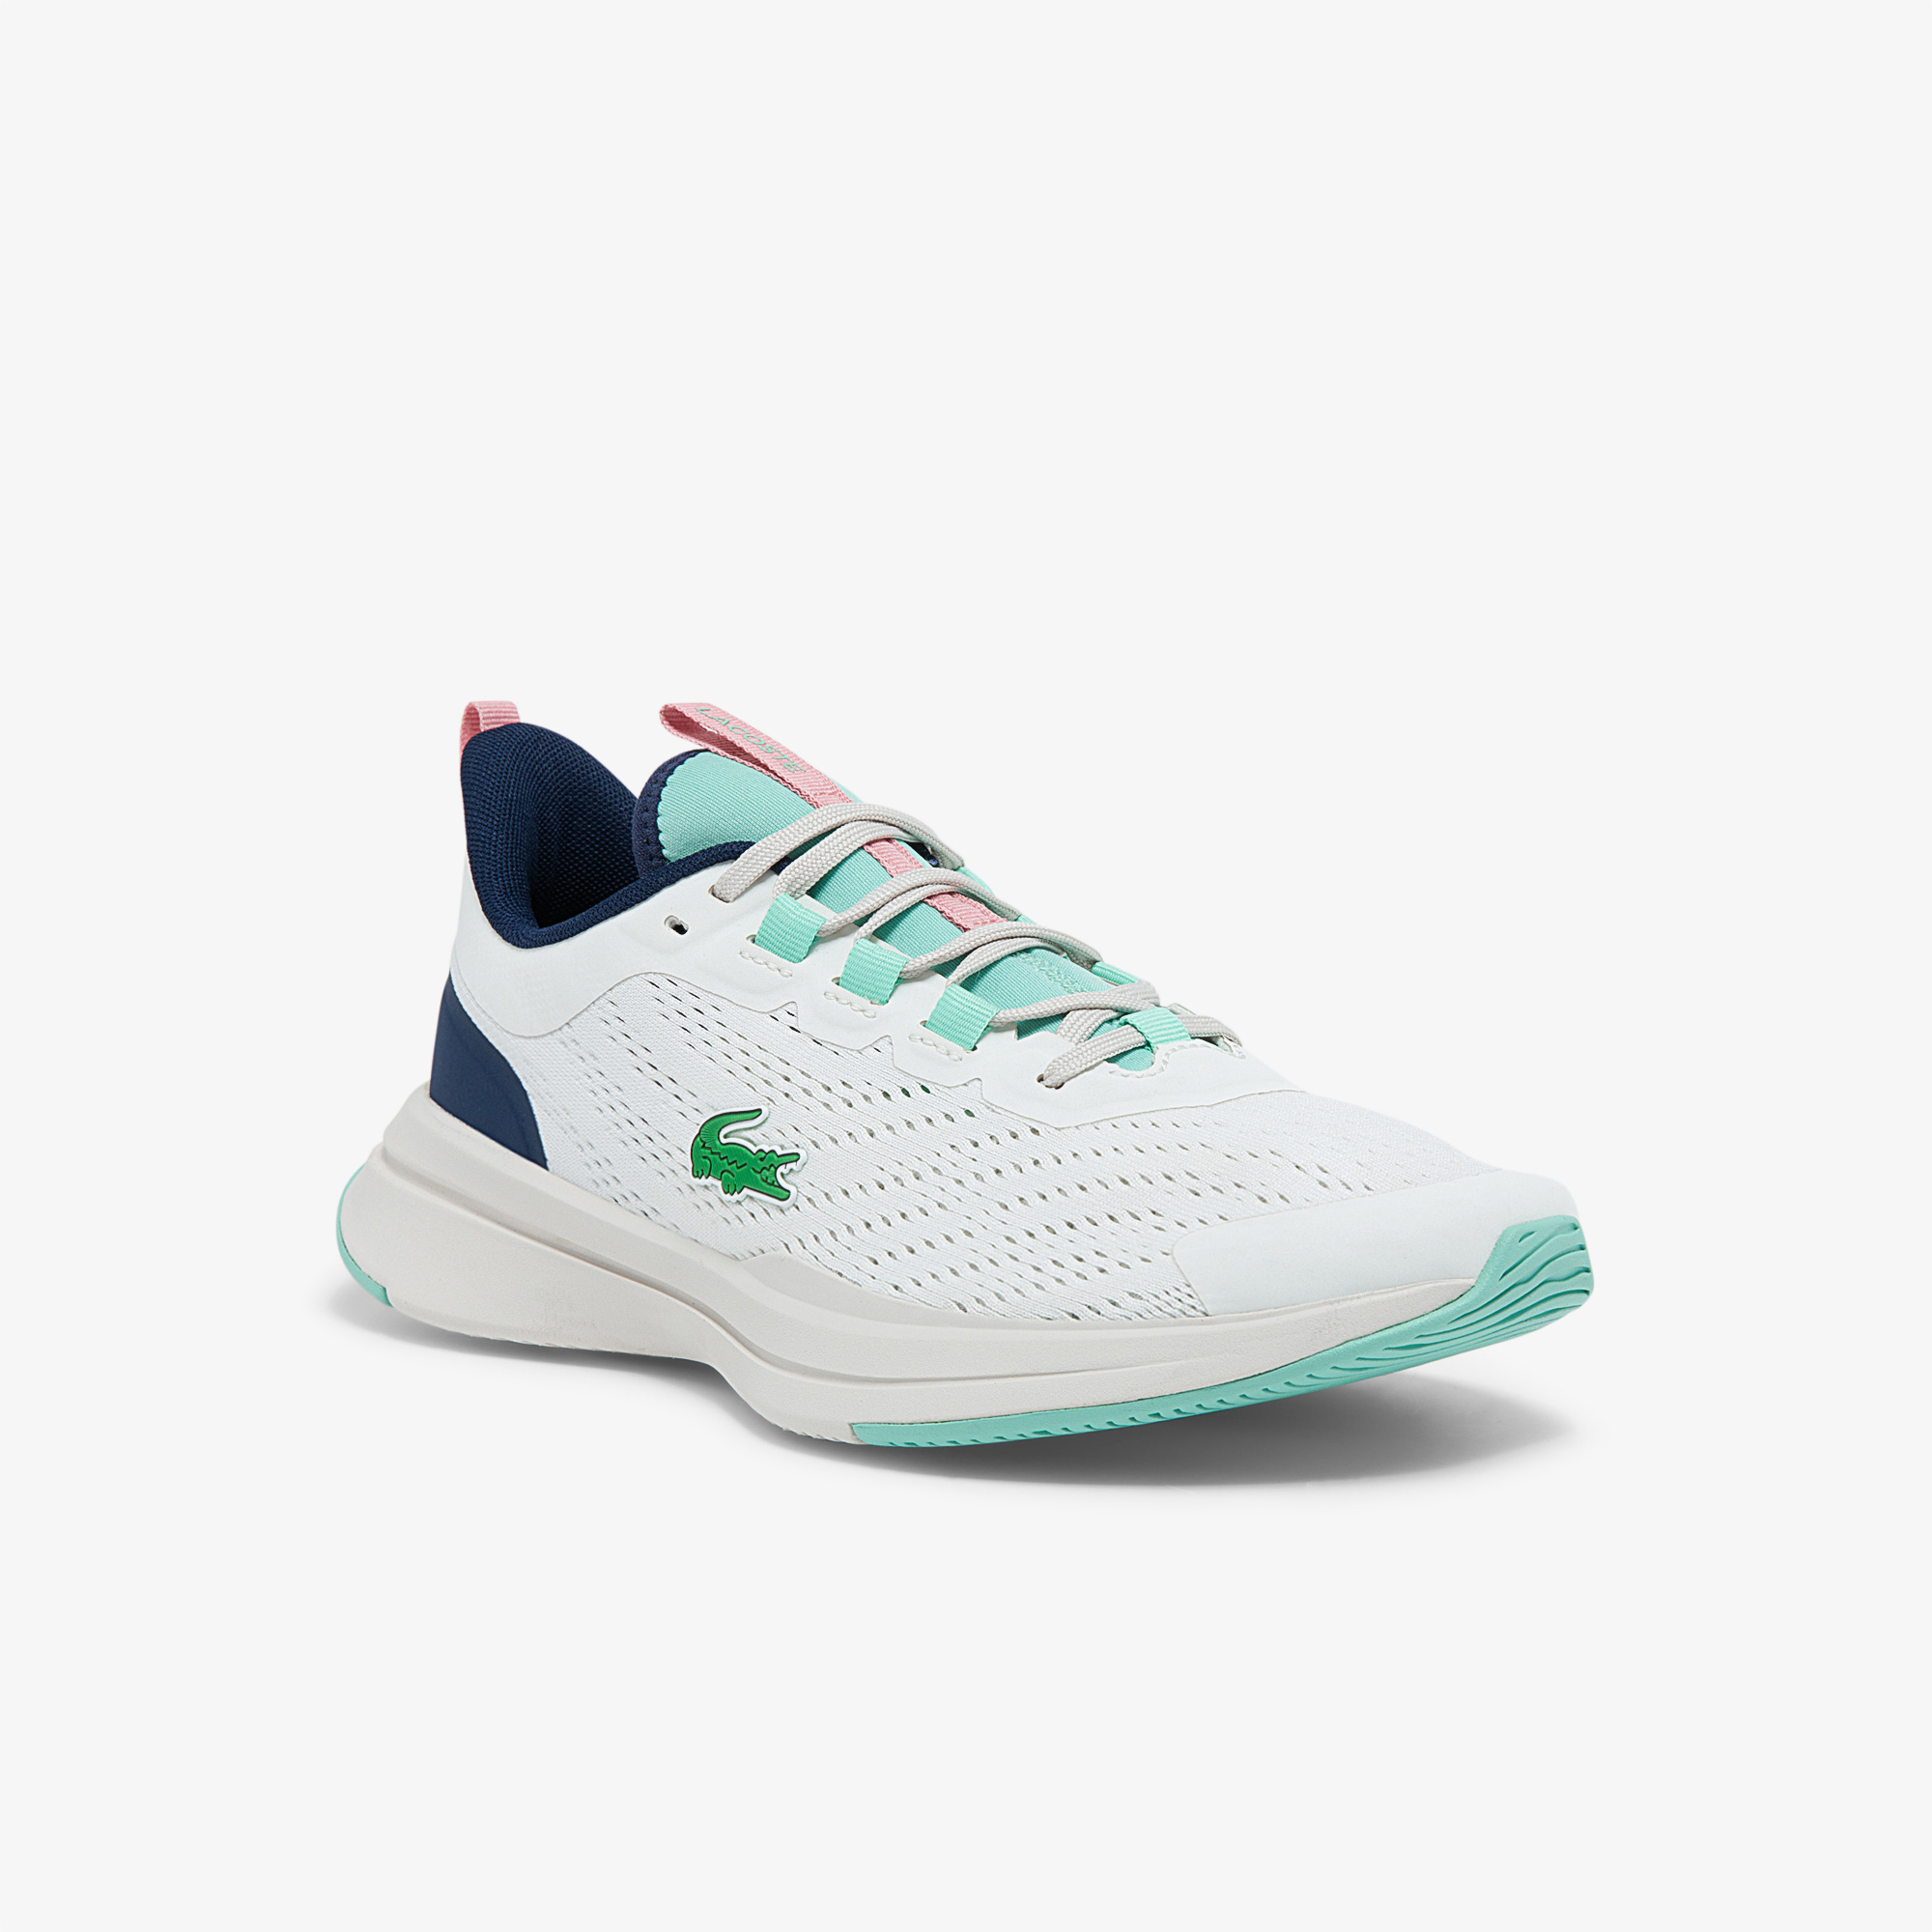 Lacoste spin. Кроссовки лакост Run Spin. Lacoste кроссовки l Spin. Кроссовки лакост Run Spin EVO. Кроссовки Lacoste Deluxe Spin белые.